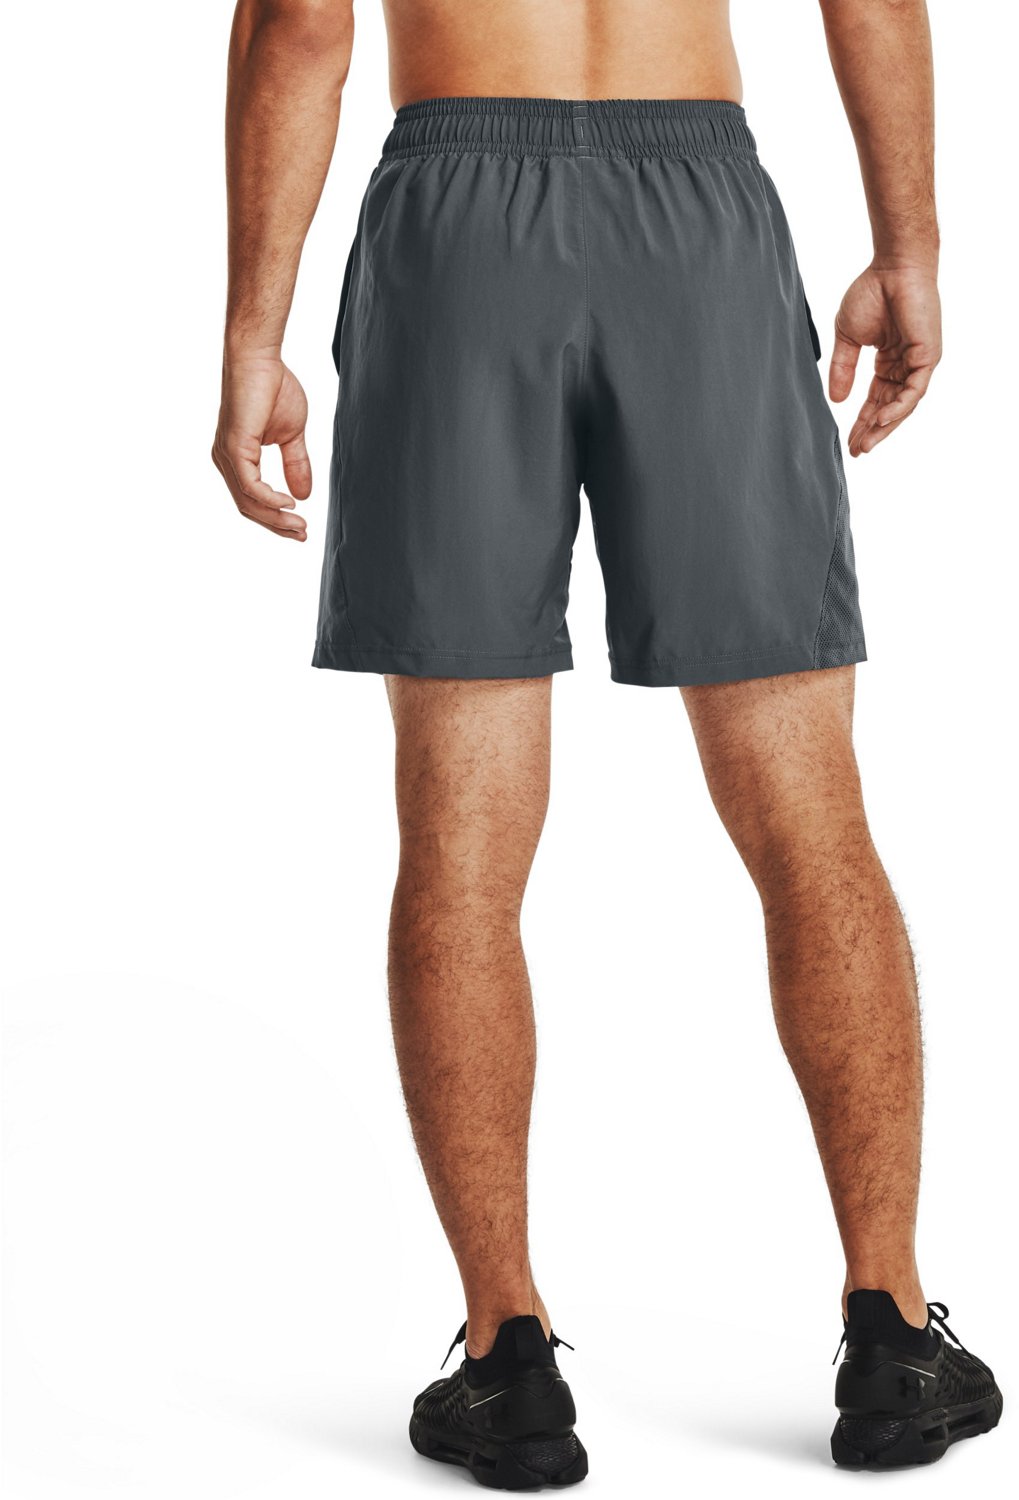 Under Armour Men's Woven Graphic Shorts | Academy